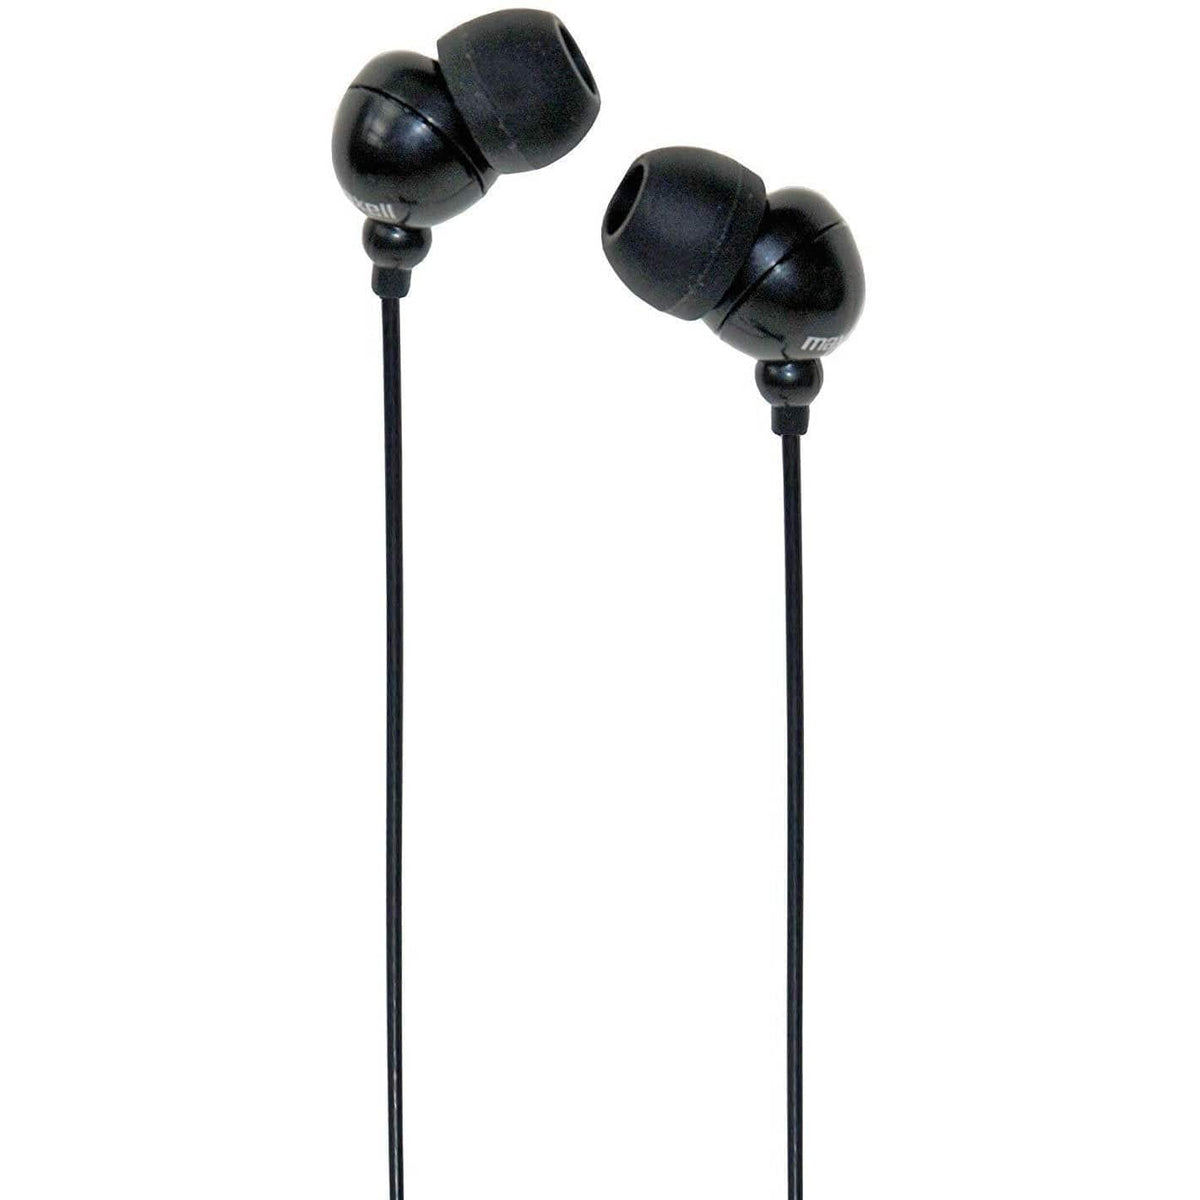 Maxell Plugz In-Ear Headphones Black [Accessories]